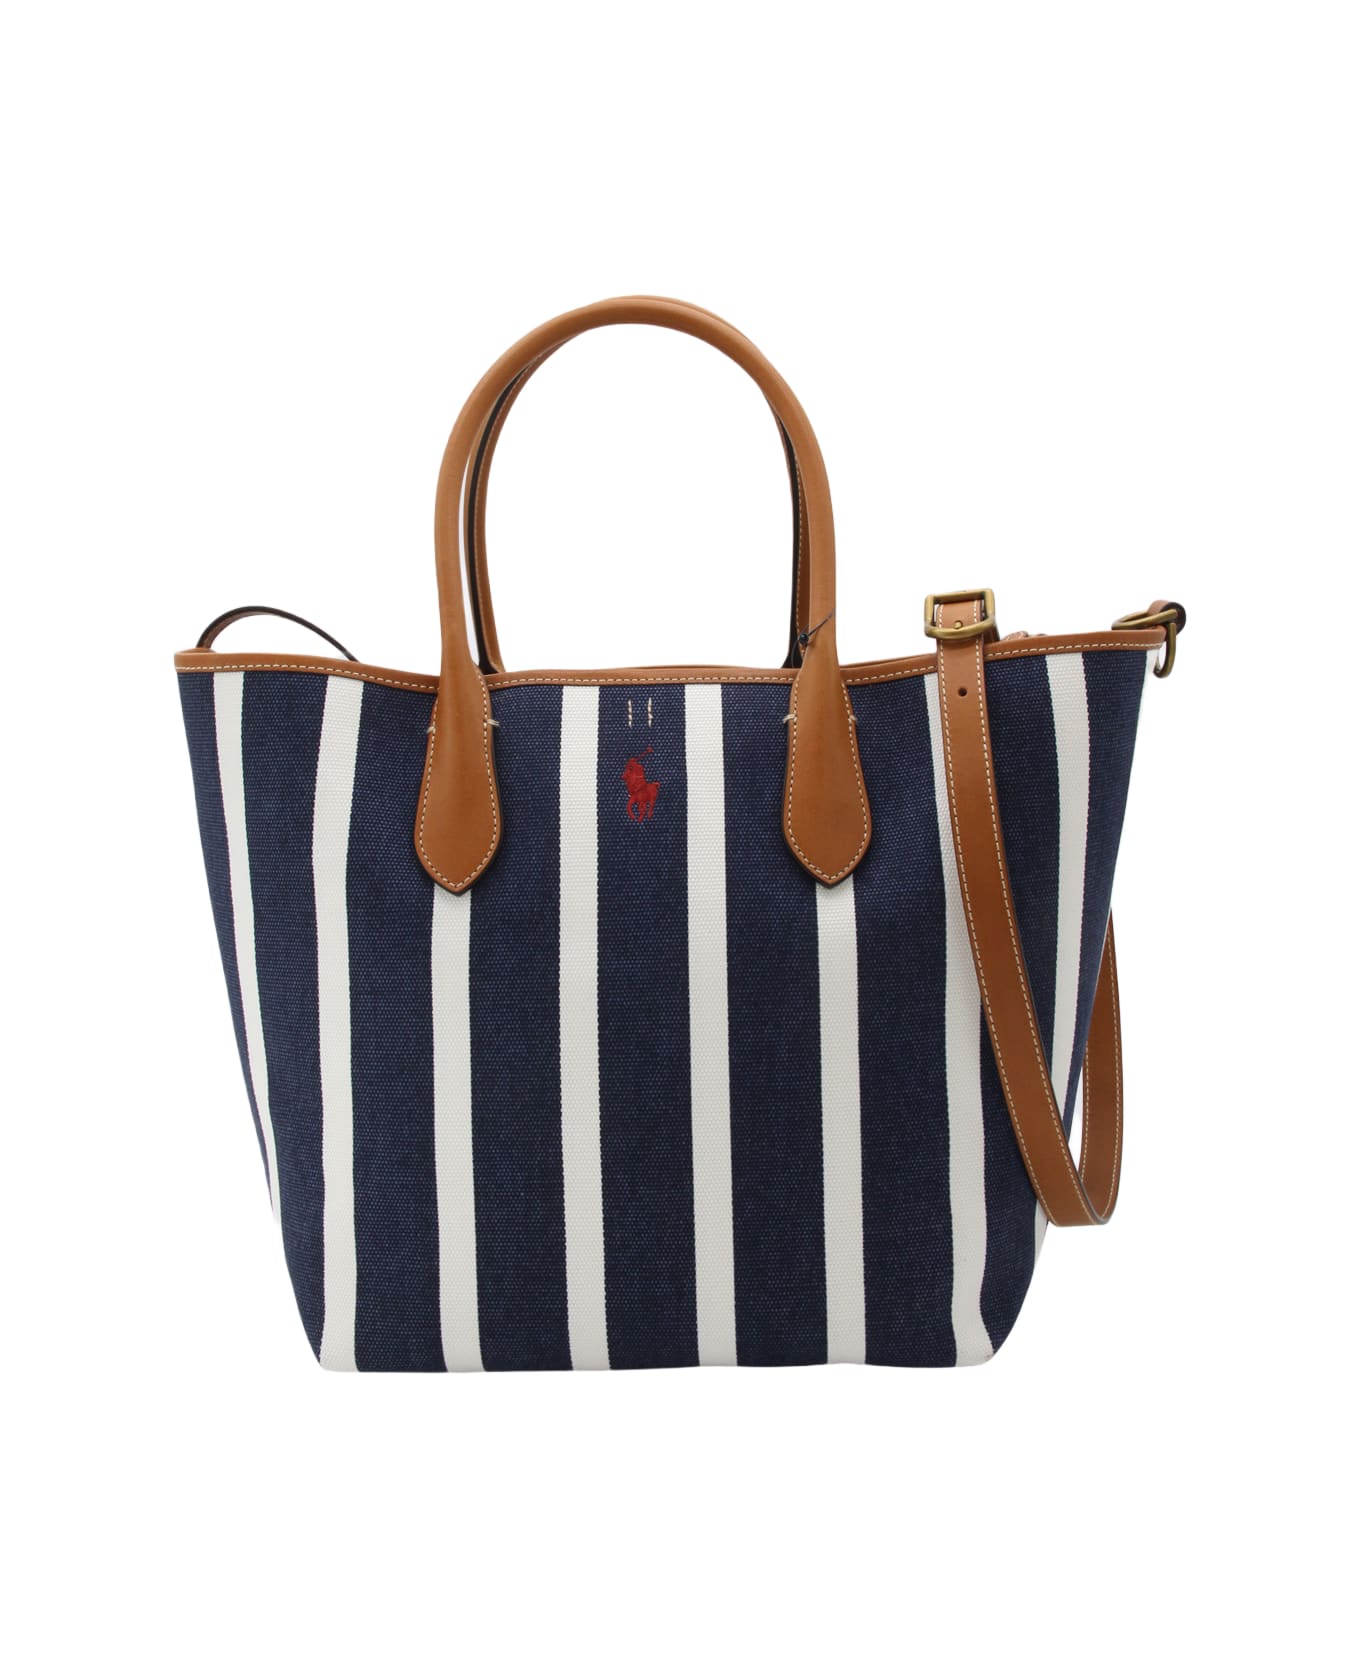 Polo Ralph Lauren Blue And White Cotton Tote Bag - NAVY-BIANCO